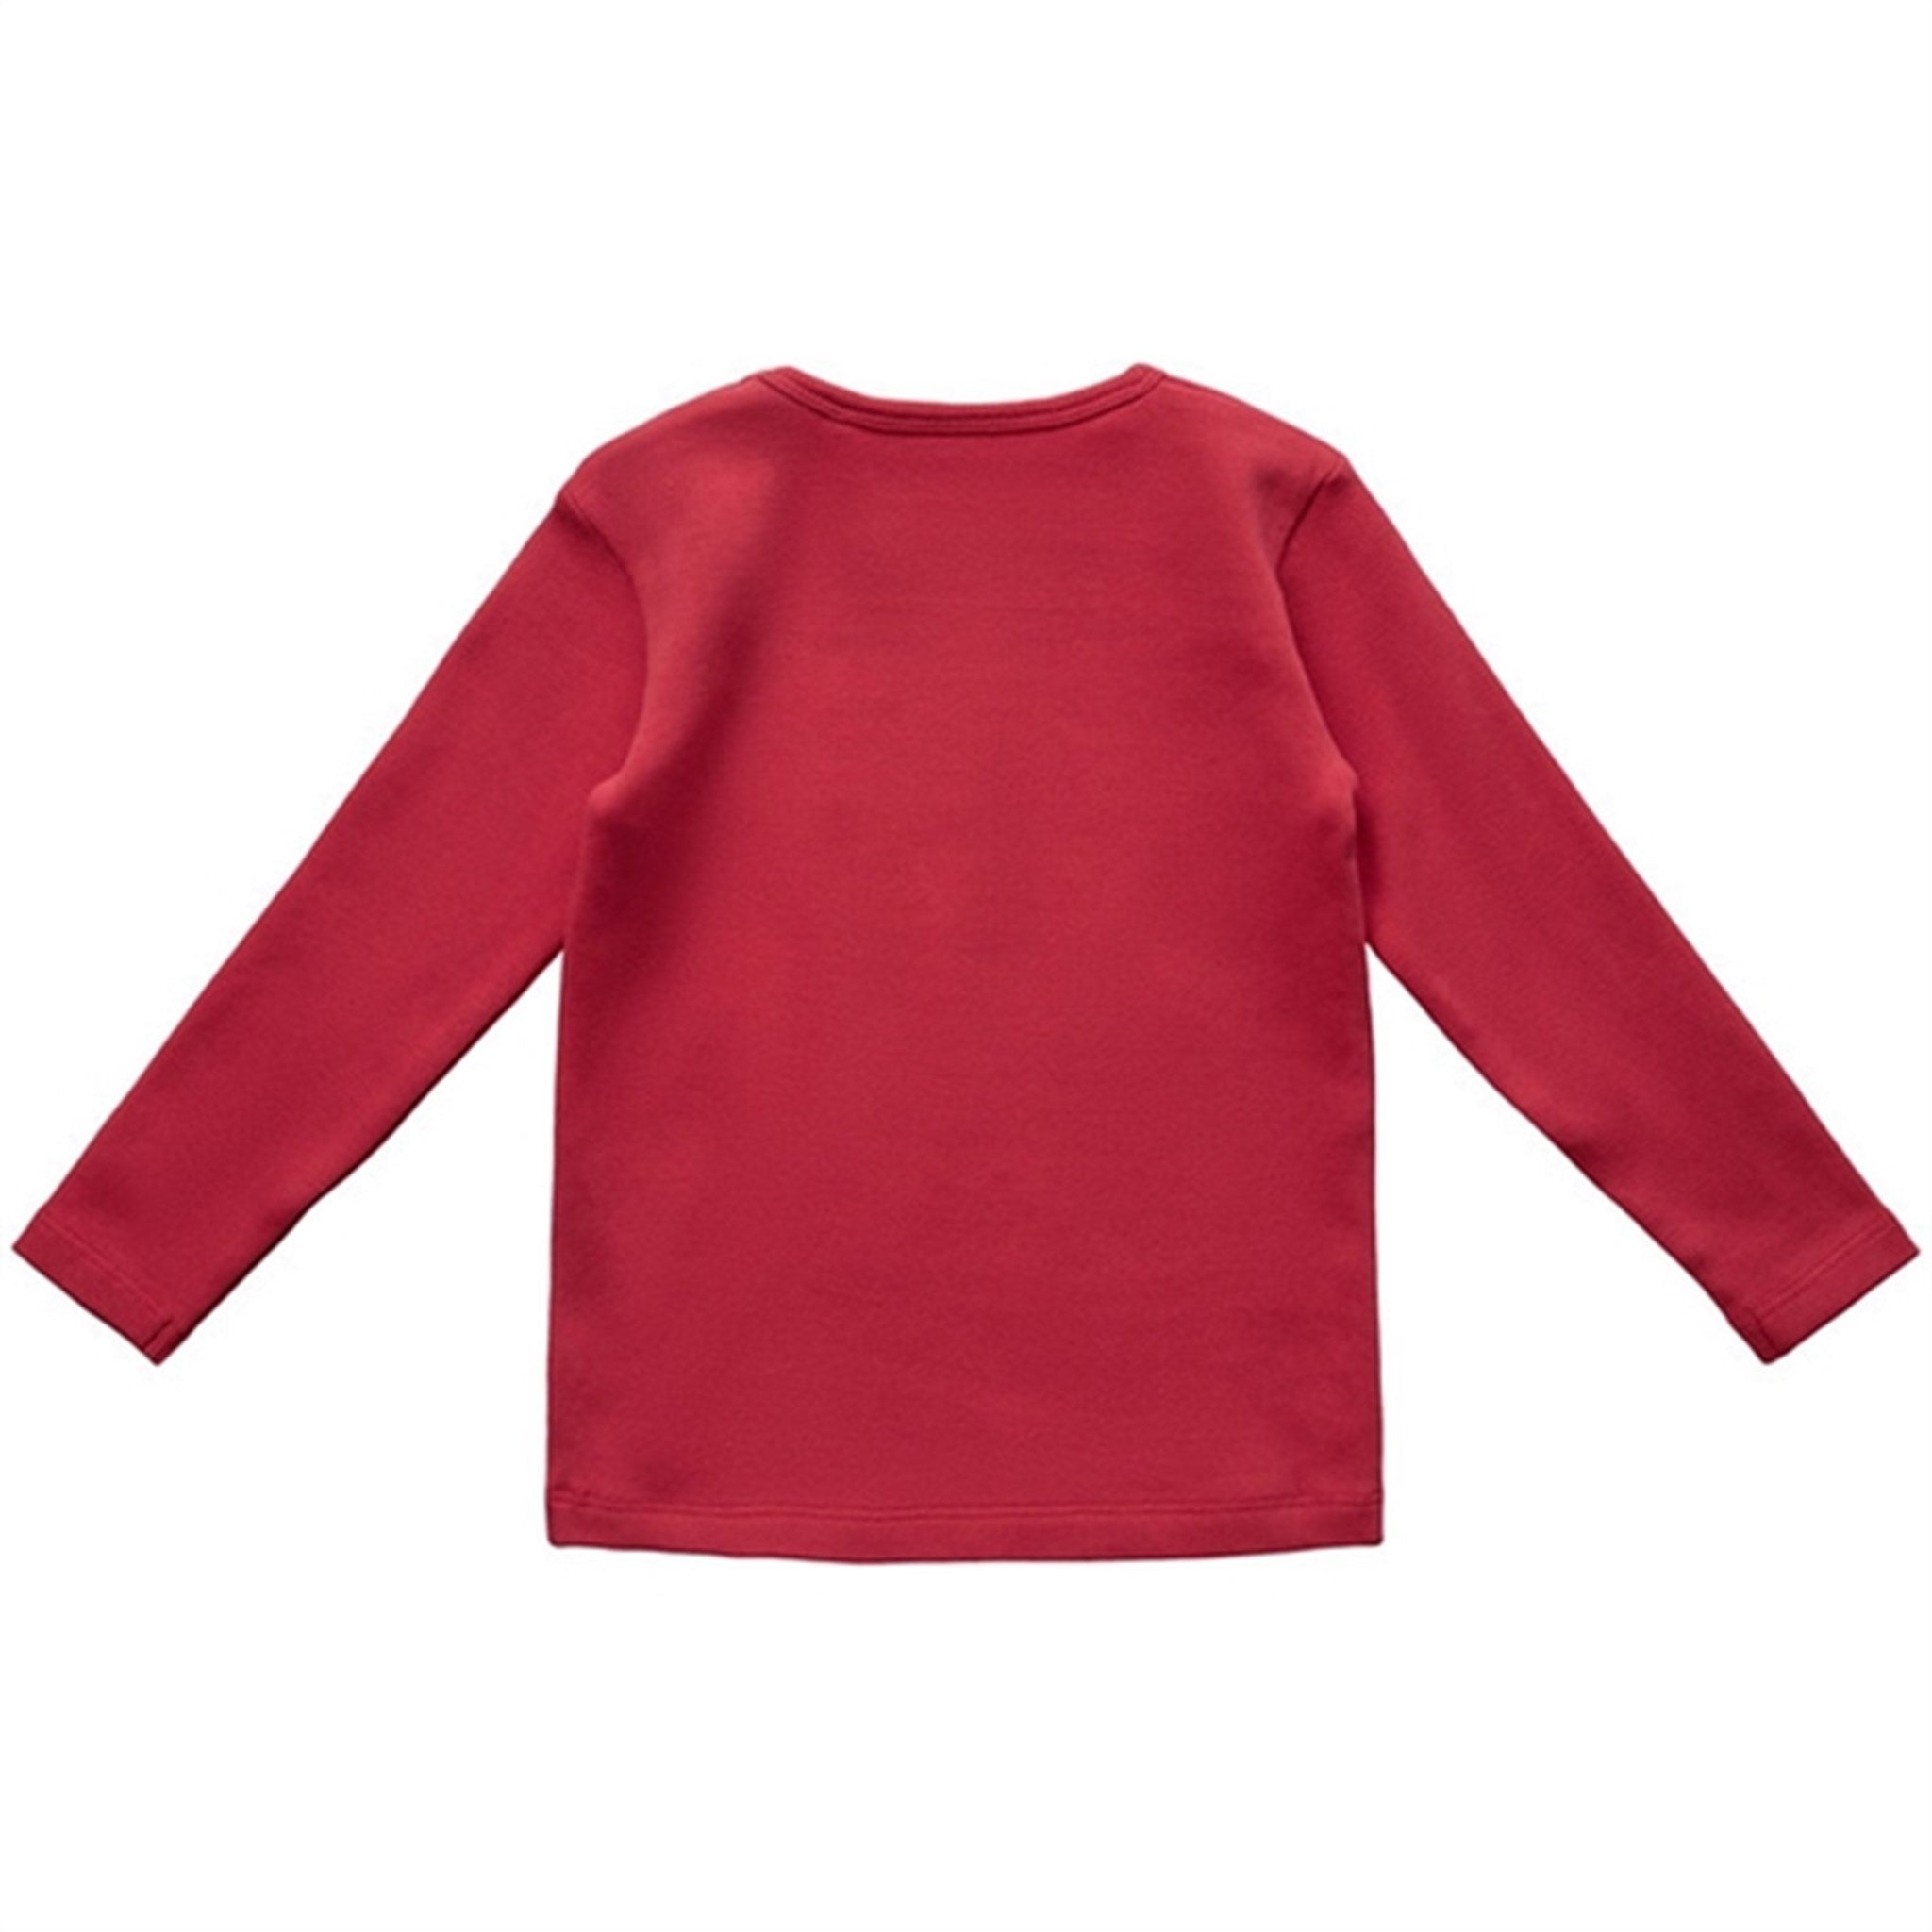 Sofie Schnoor Berry Red Bluse 3